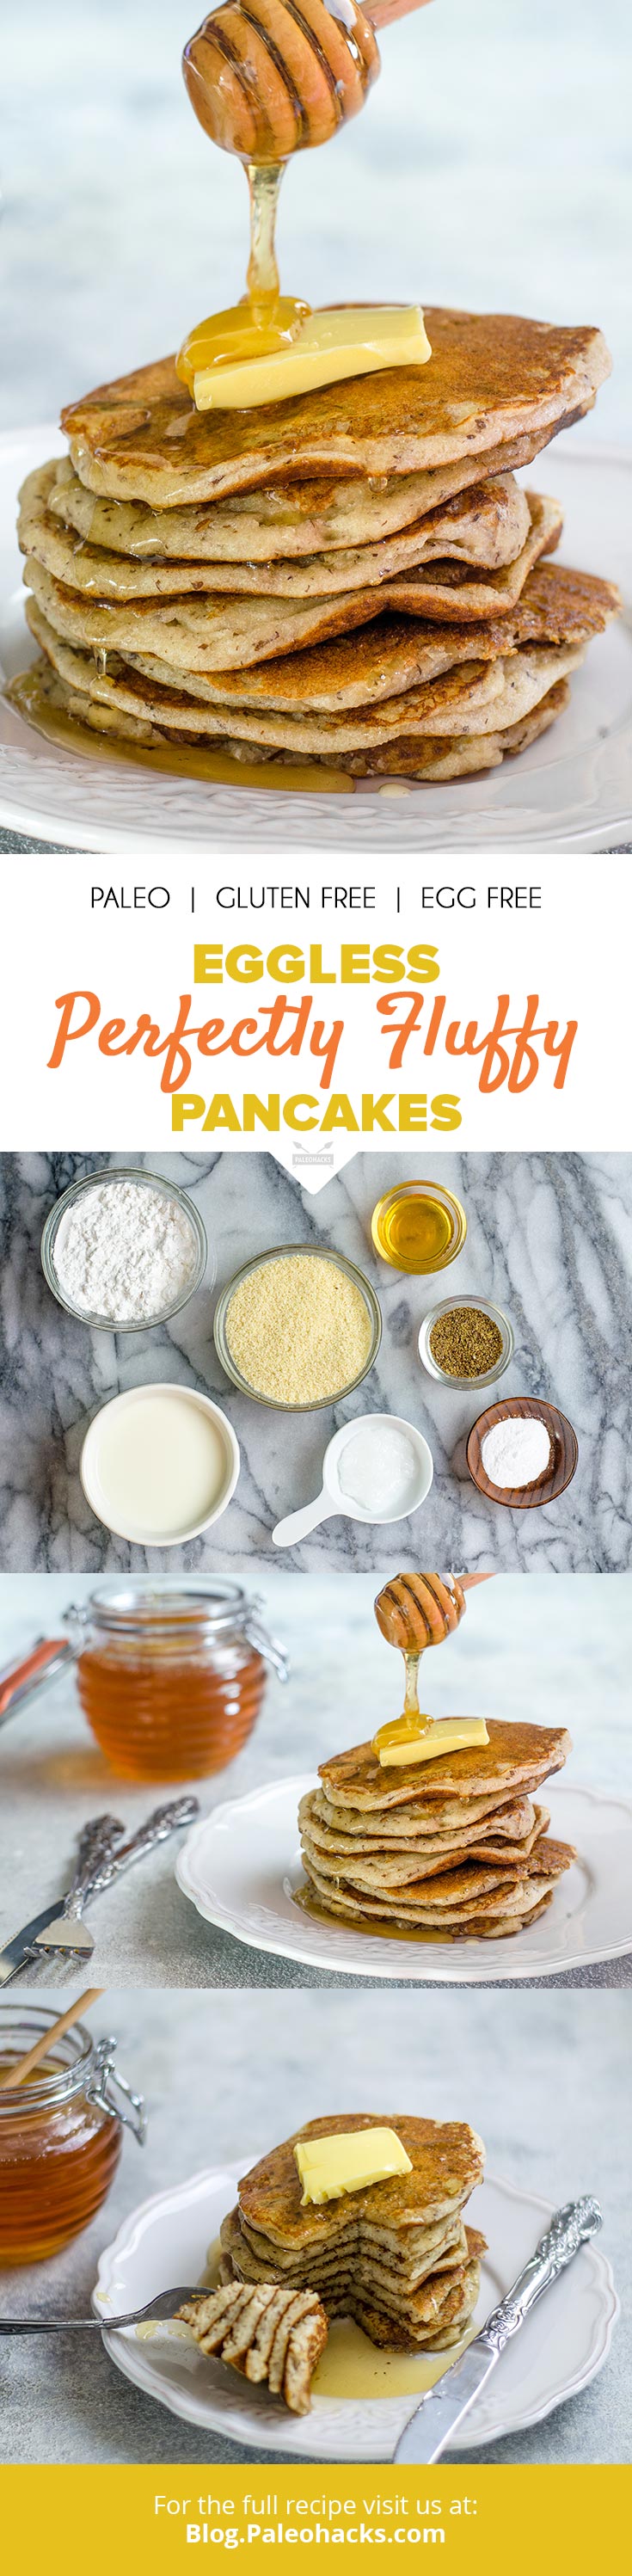 Start your day with a hot stack of light and egg-free pancakes! Whether you’re sensitive to eggs or want to try something new, these pancakes are for you.